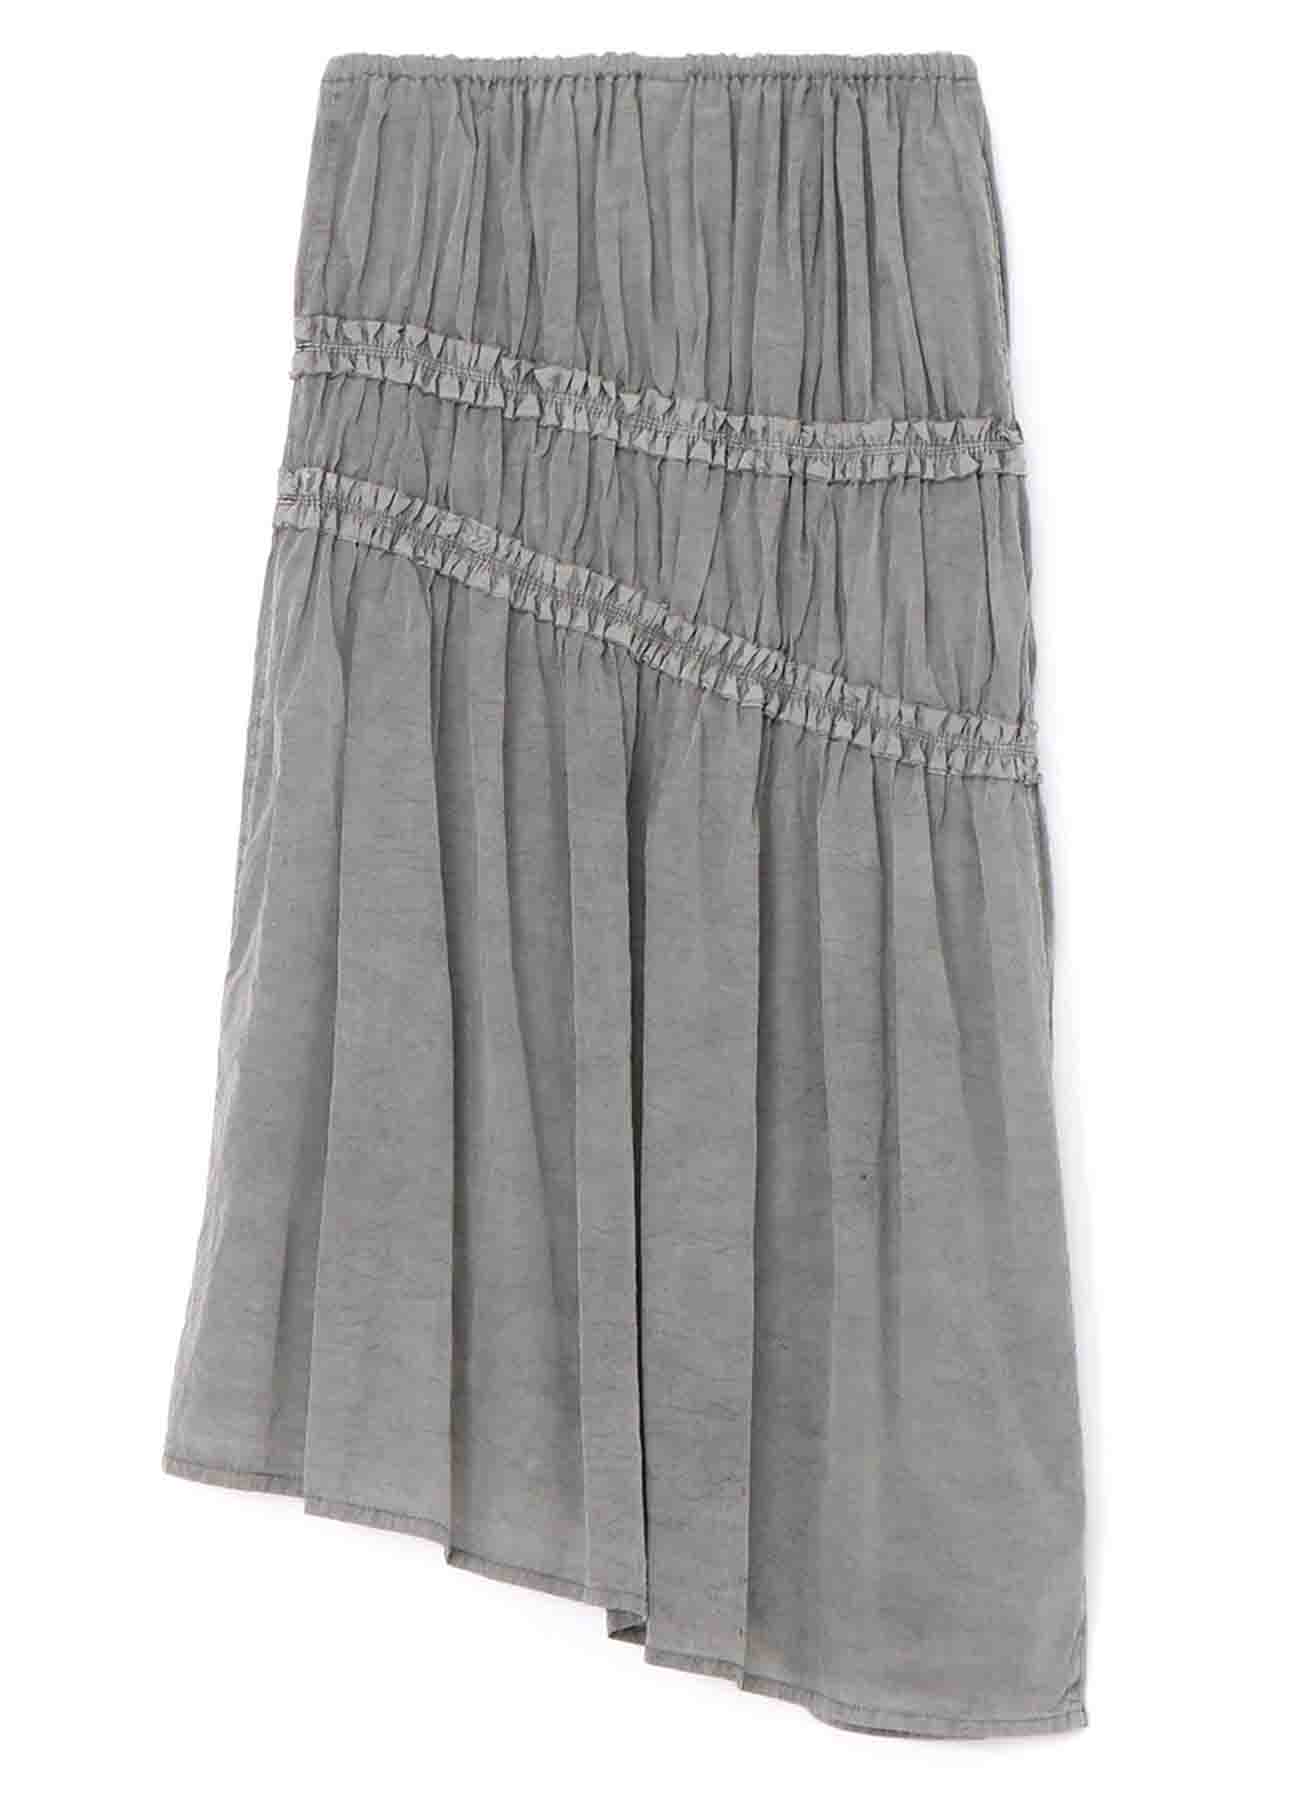 CUPRA COTTON PRODUCT PIGMENT DYED WRINKLED LAWN ASYMMETRY GATHER SKIRT